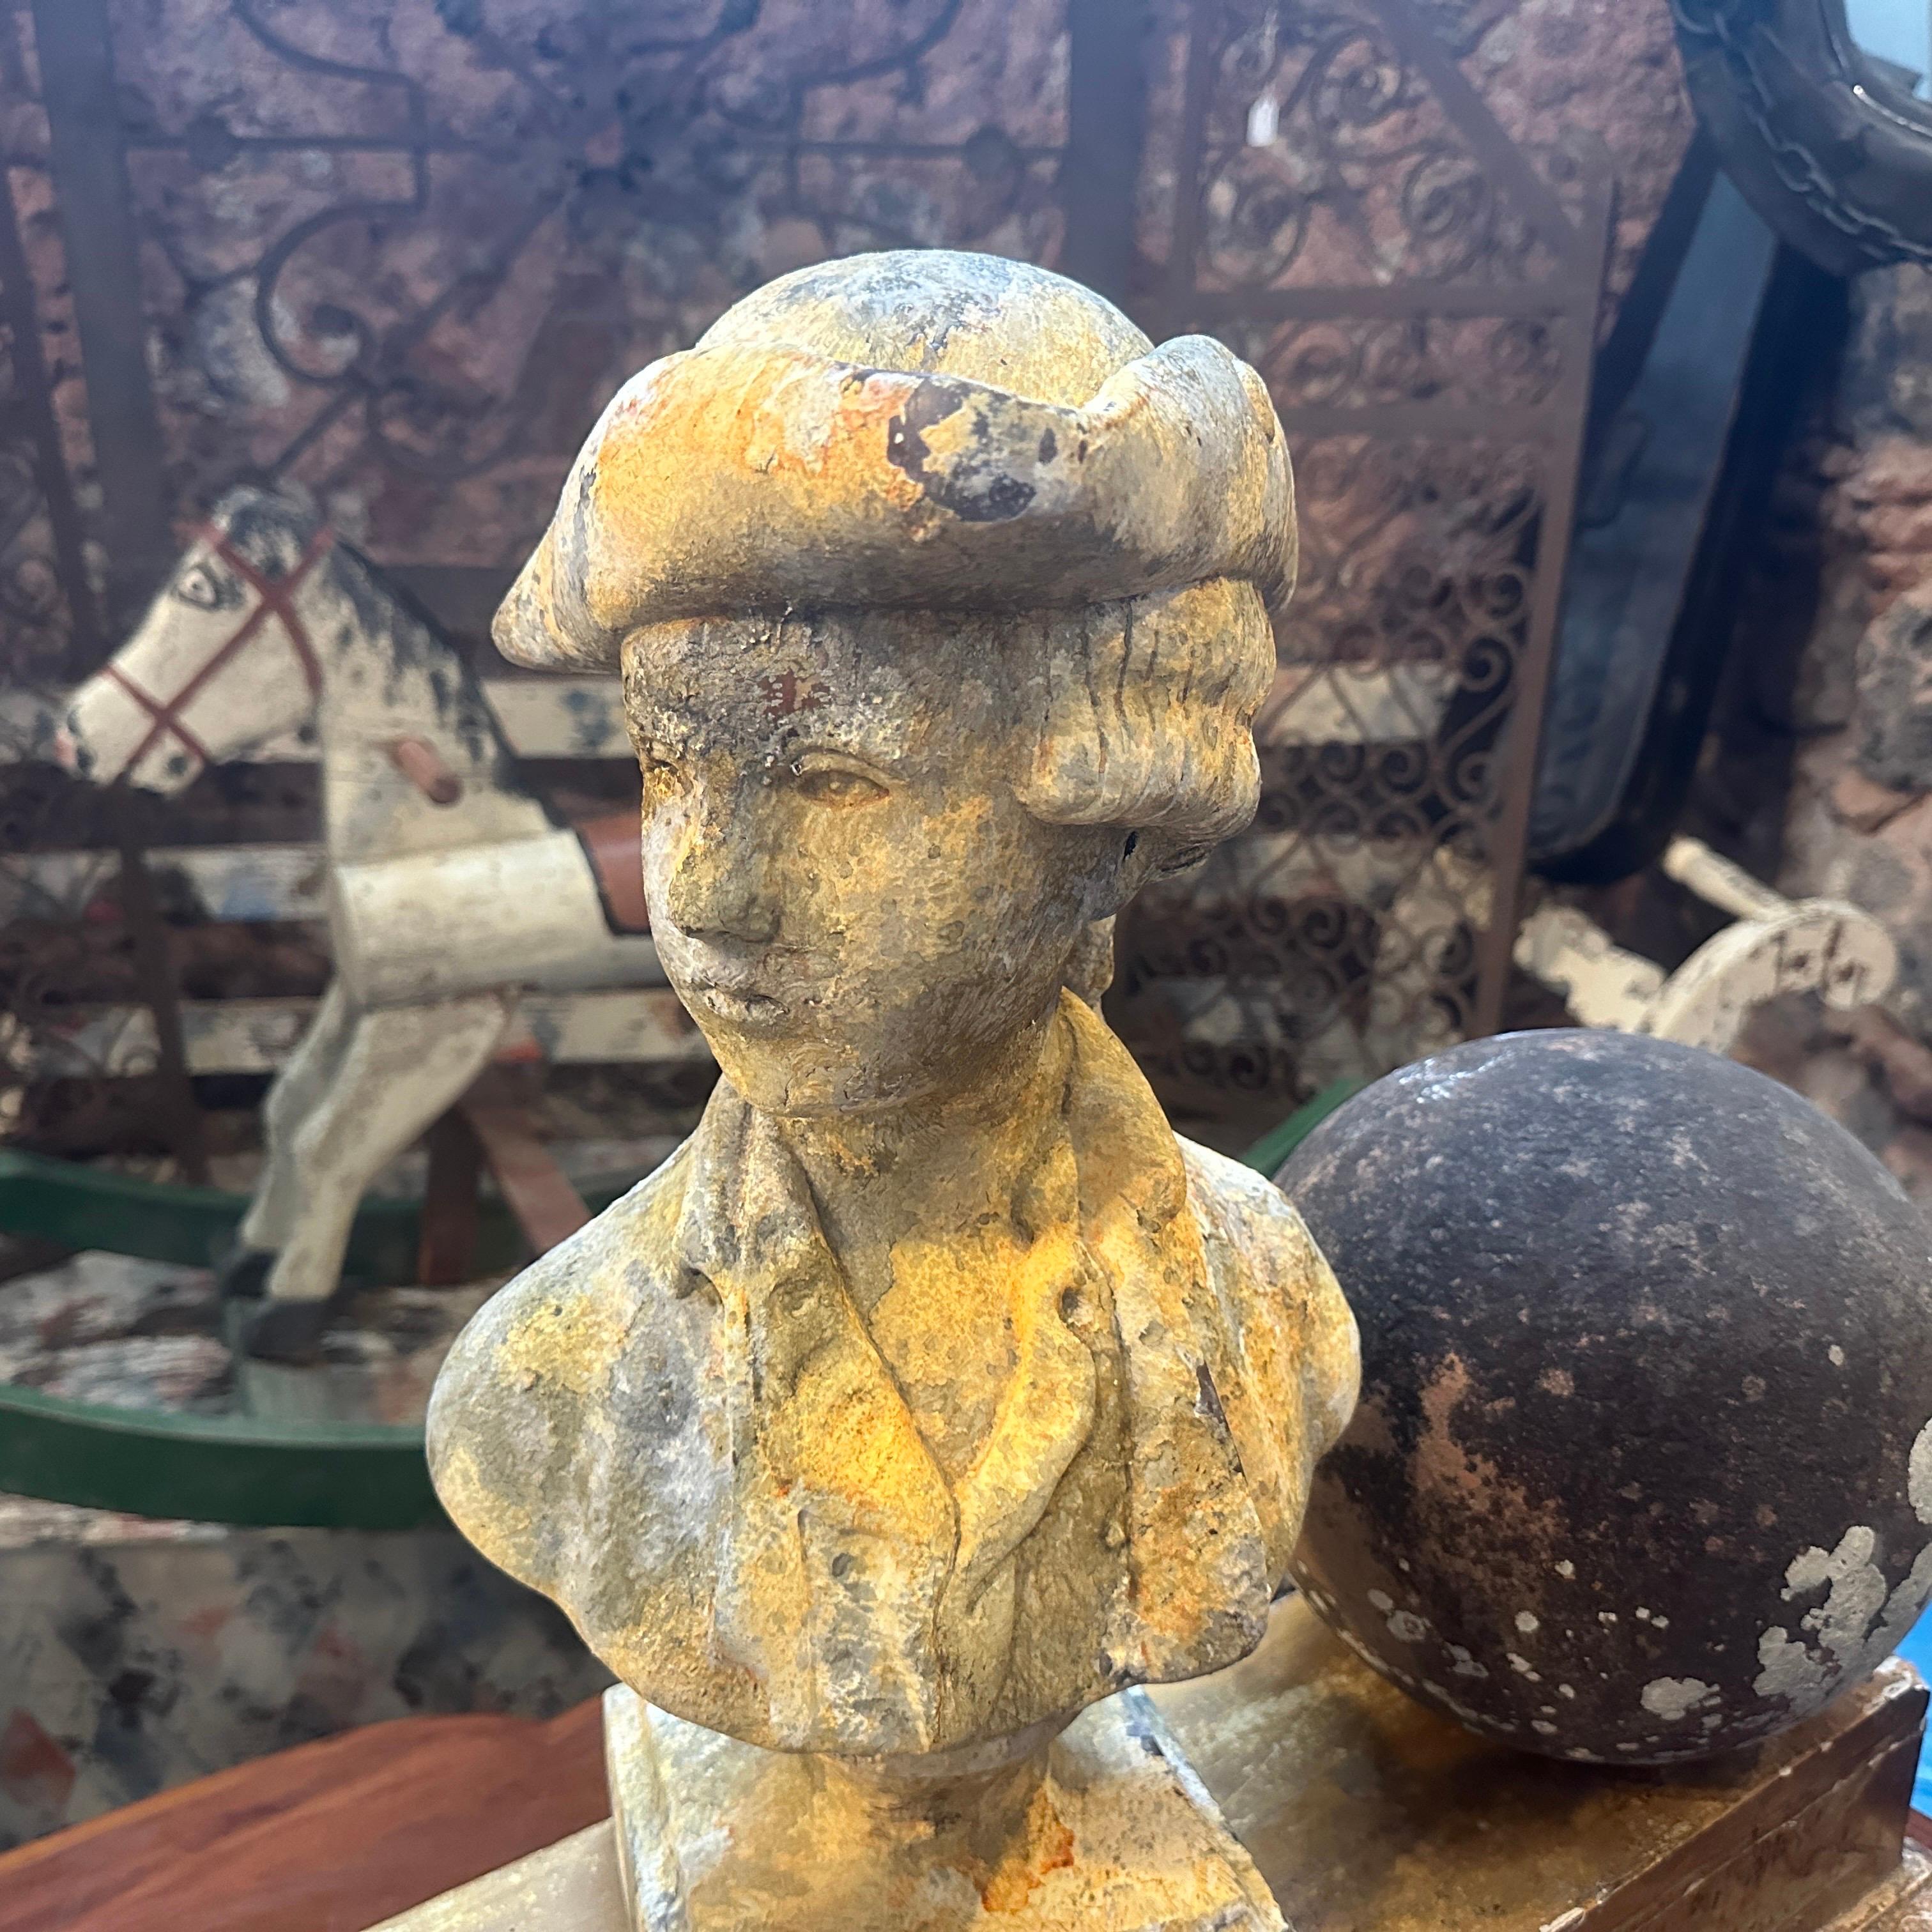 These Art Nouveau Italian busts likely embody the movement's hallmark features and also incorporating elements influenced by Italian art and culture. Their historical and artistic value makes them not just sculptures but artifacts that capture the